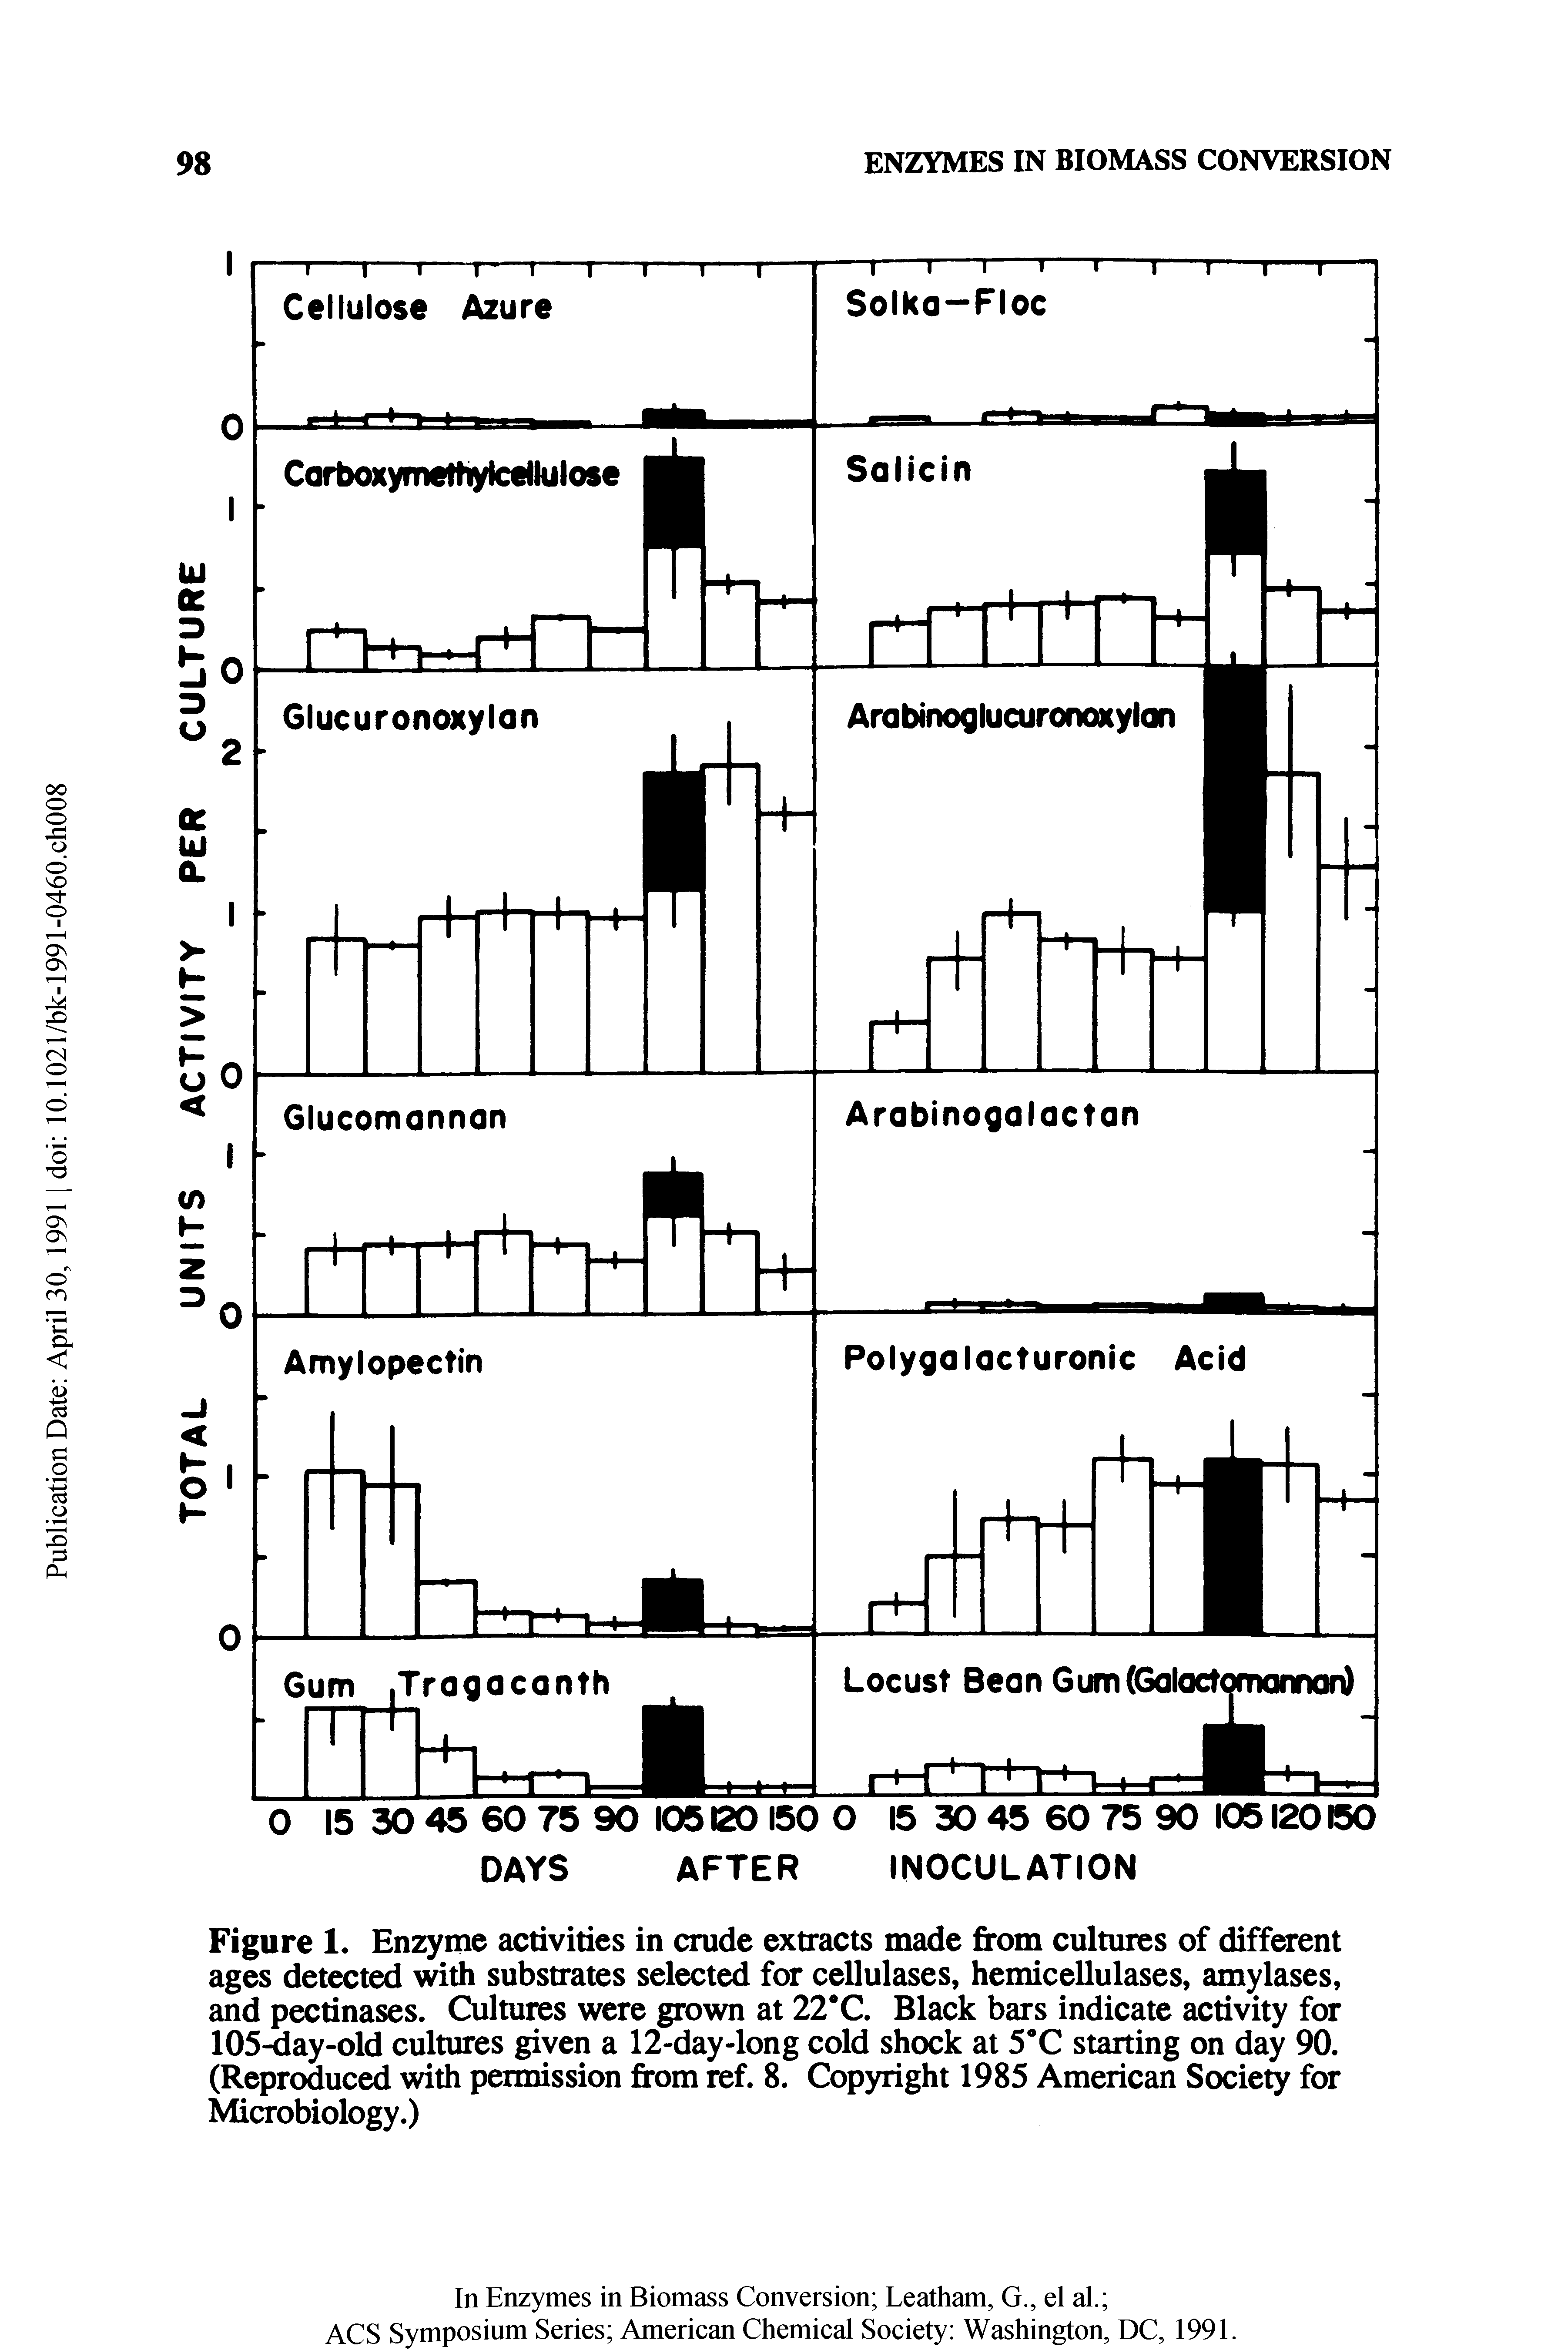 Figure 1. Enzyme activities in crude extracts made from cultures of different ages detected with substrates selected for cellulases, hemicellulases, amylases, and pectinases. Cultures were grown at 22 C. Black bars indicate activity for 105-day-old cultures given a 12-day-long cold shock at 5 C starting on day 90. (Reproduced with permission from ref. 8. Copyright 1985 American Society for Microbiology.)...